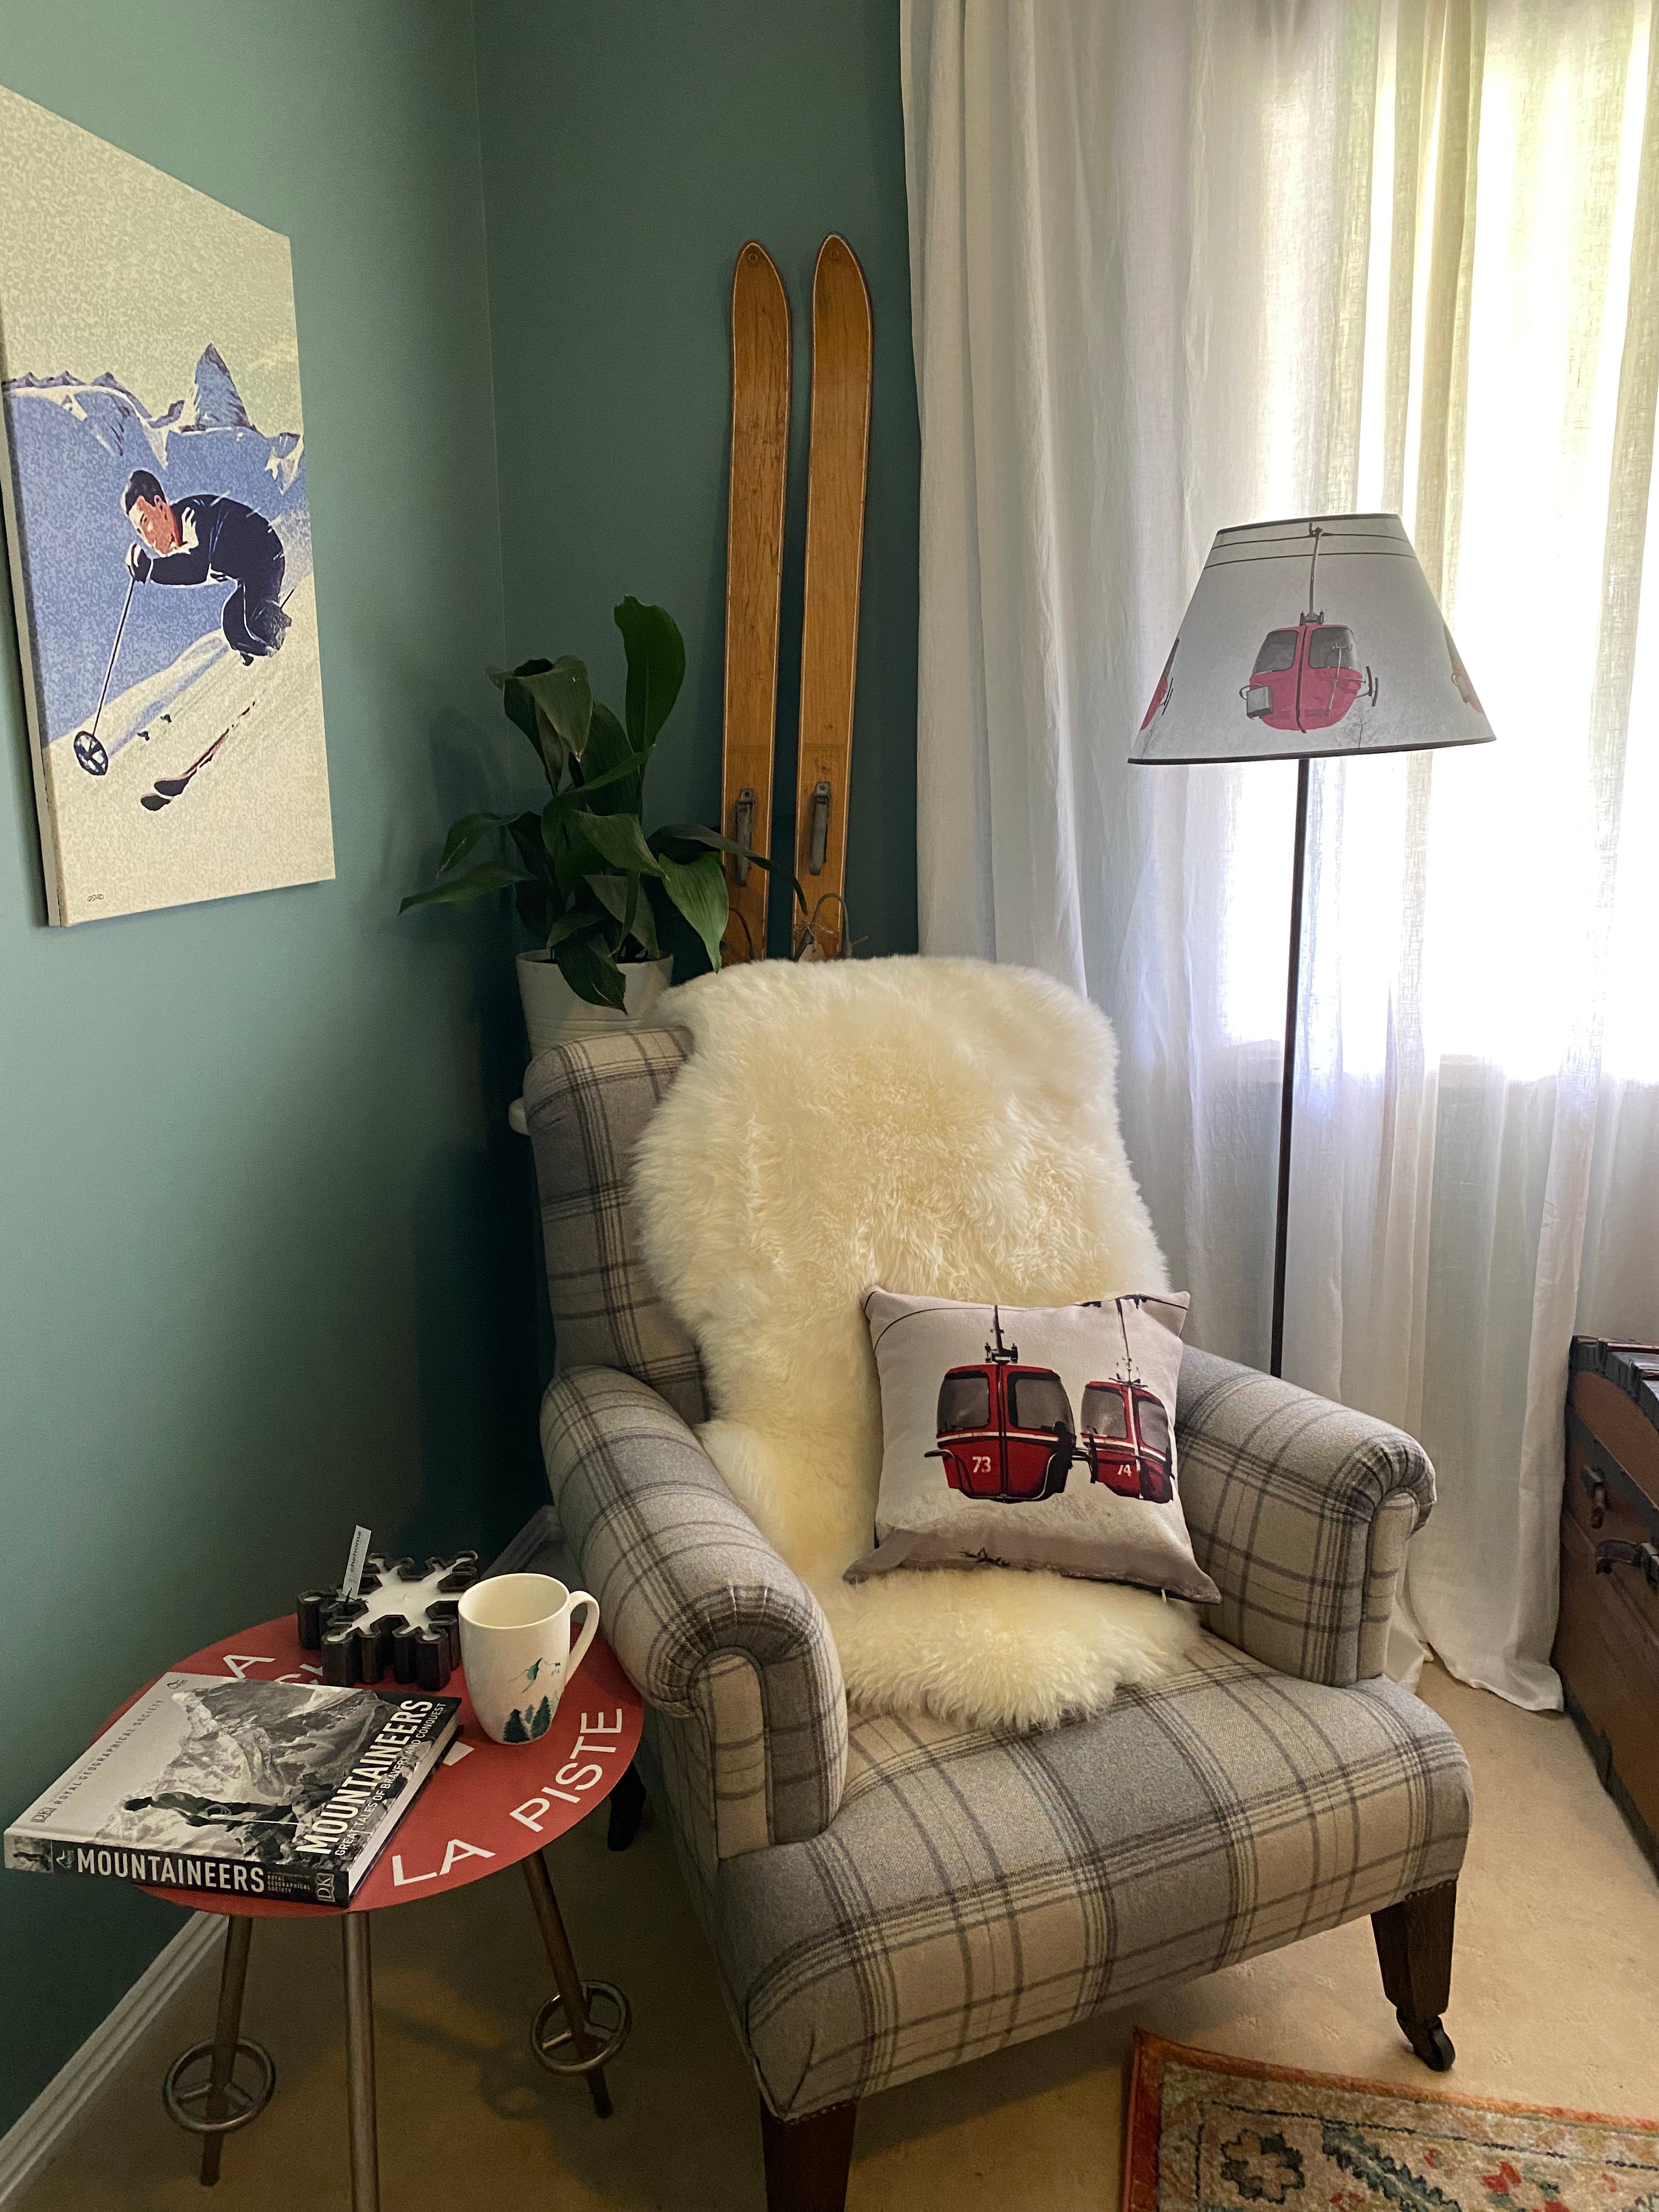 Photo of a blue tartan armchair, white sheepskin rug & red gondola cushion, with lamp & vintage trunk to the right, pot plant & wooden skis behind the chair, vintage skiing print on the left wall & alpine resort sign table with a book, a mug and candle on the left of the chair. Floor lamp with a square solid wood base supporting a brown metal rod & conical a lamp shade. Shade: 3 red egg gondolas in the air with tree tops and clouds in the background. Beige carpet, a green painted wall, white curtains.